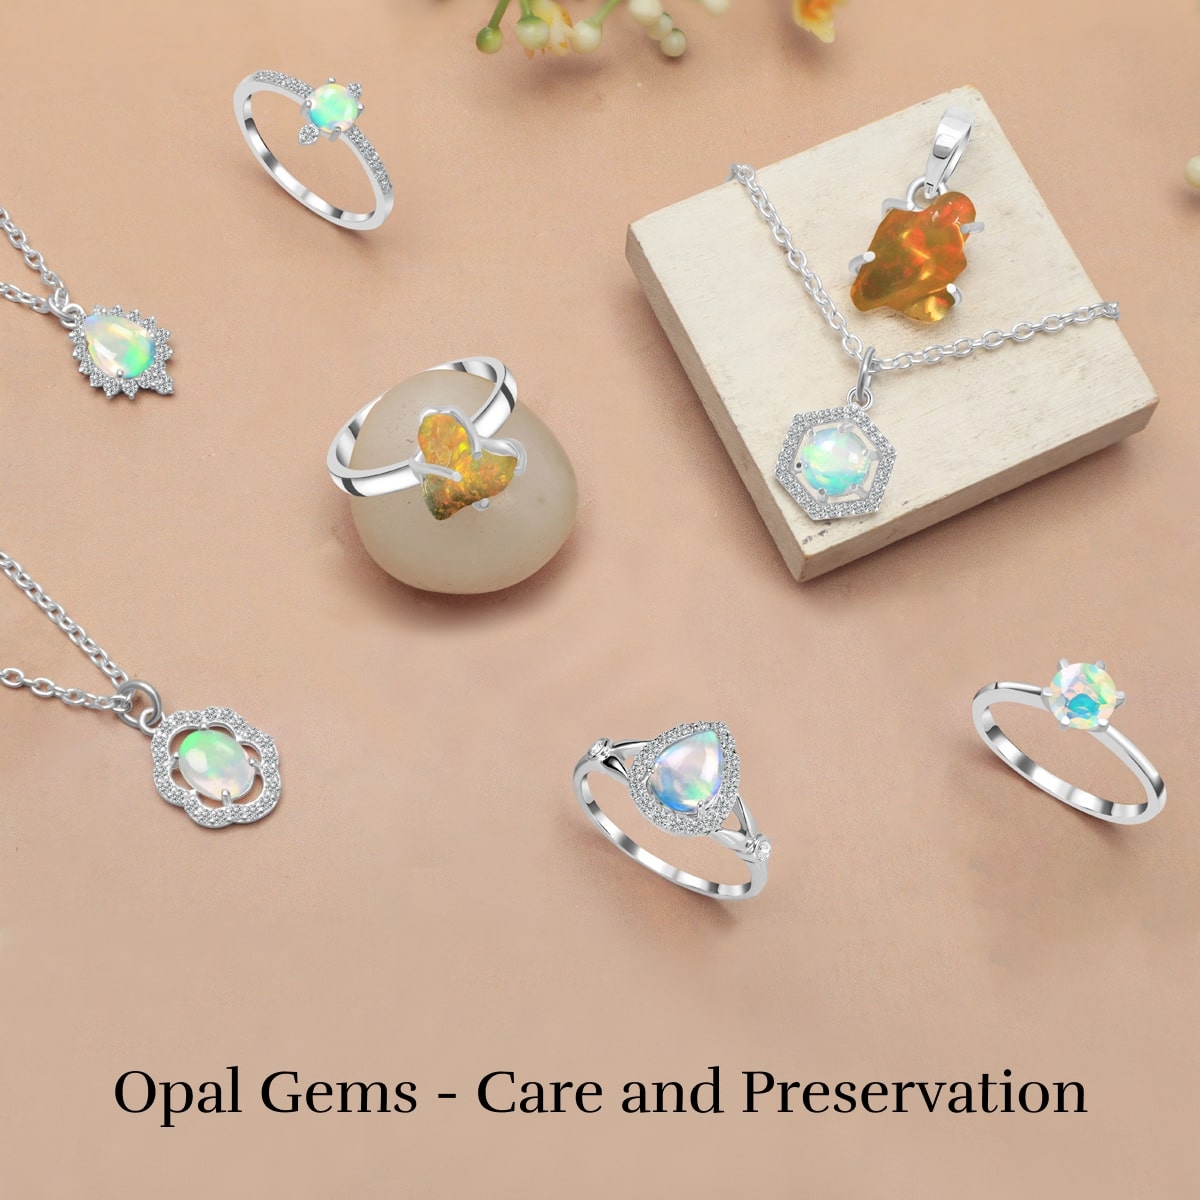 Care and Maintenance of Opal Jewelry